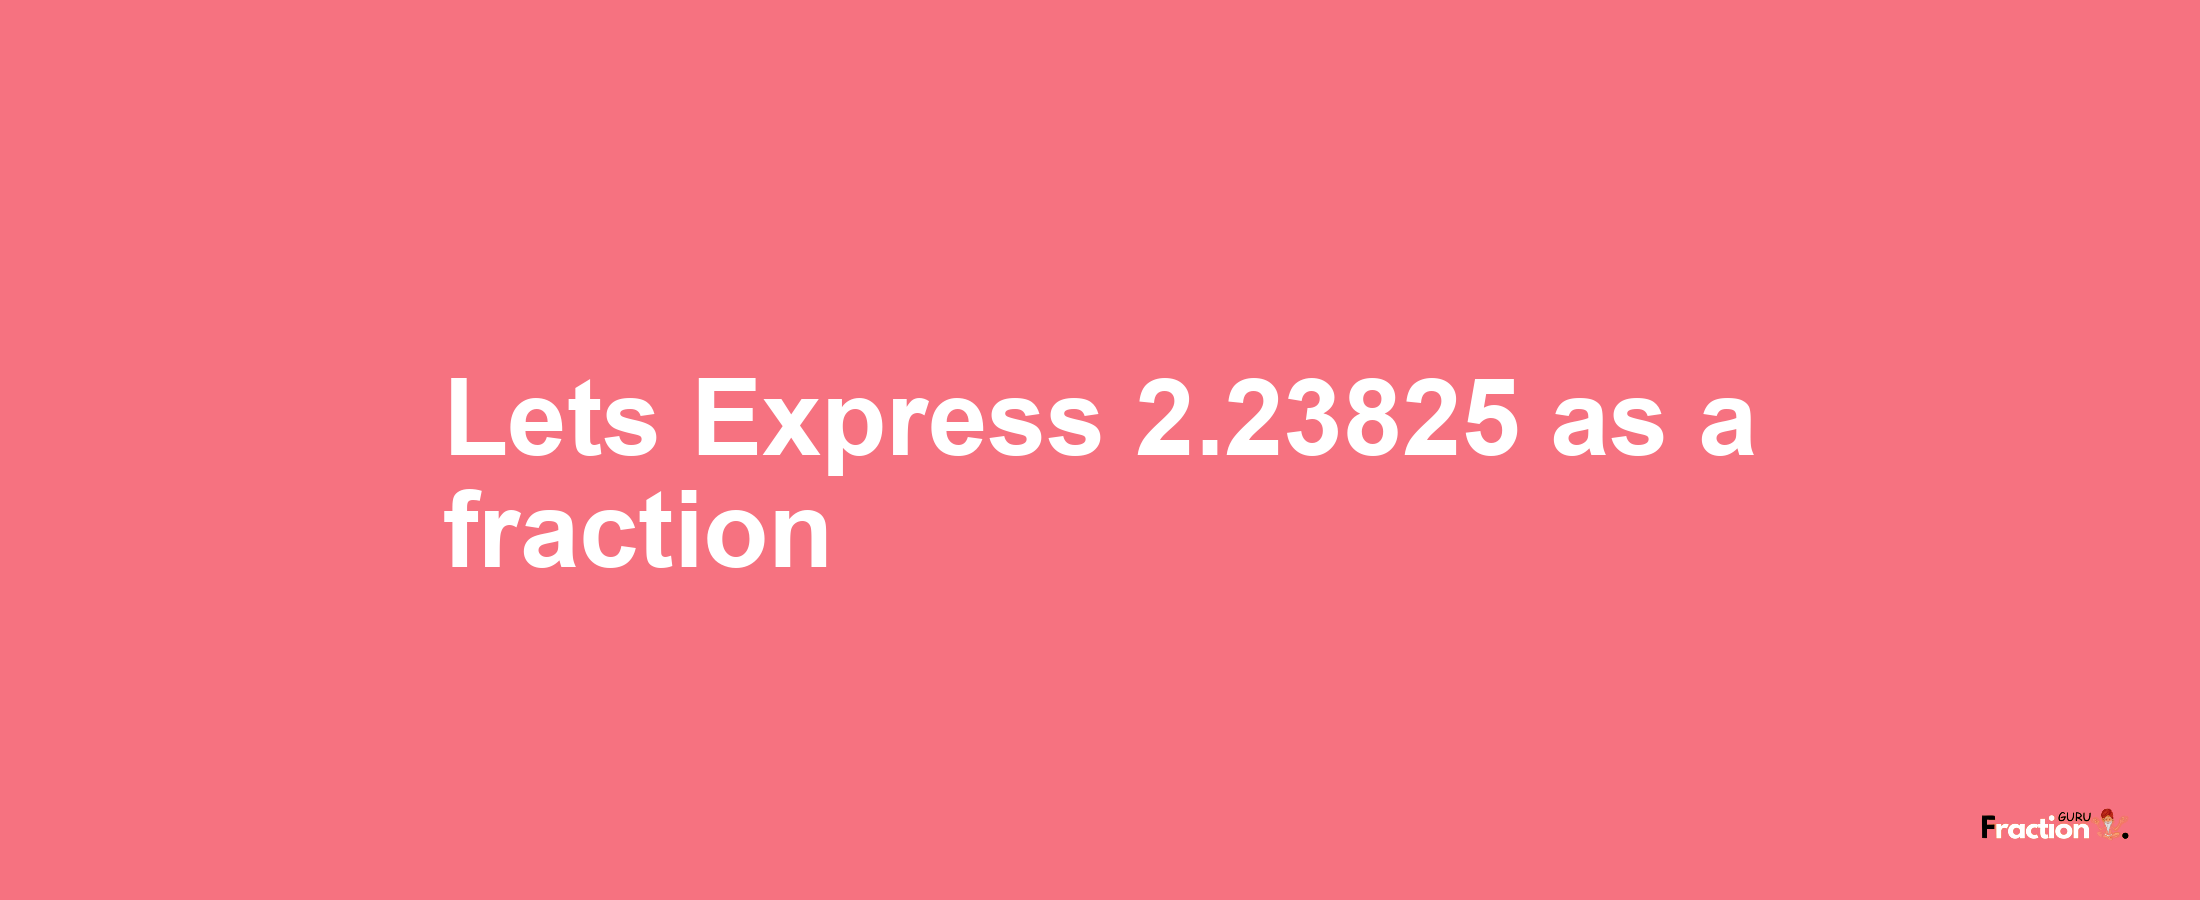 Lets Express 2.23825 as afraction